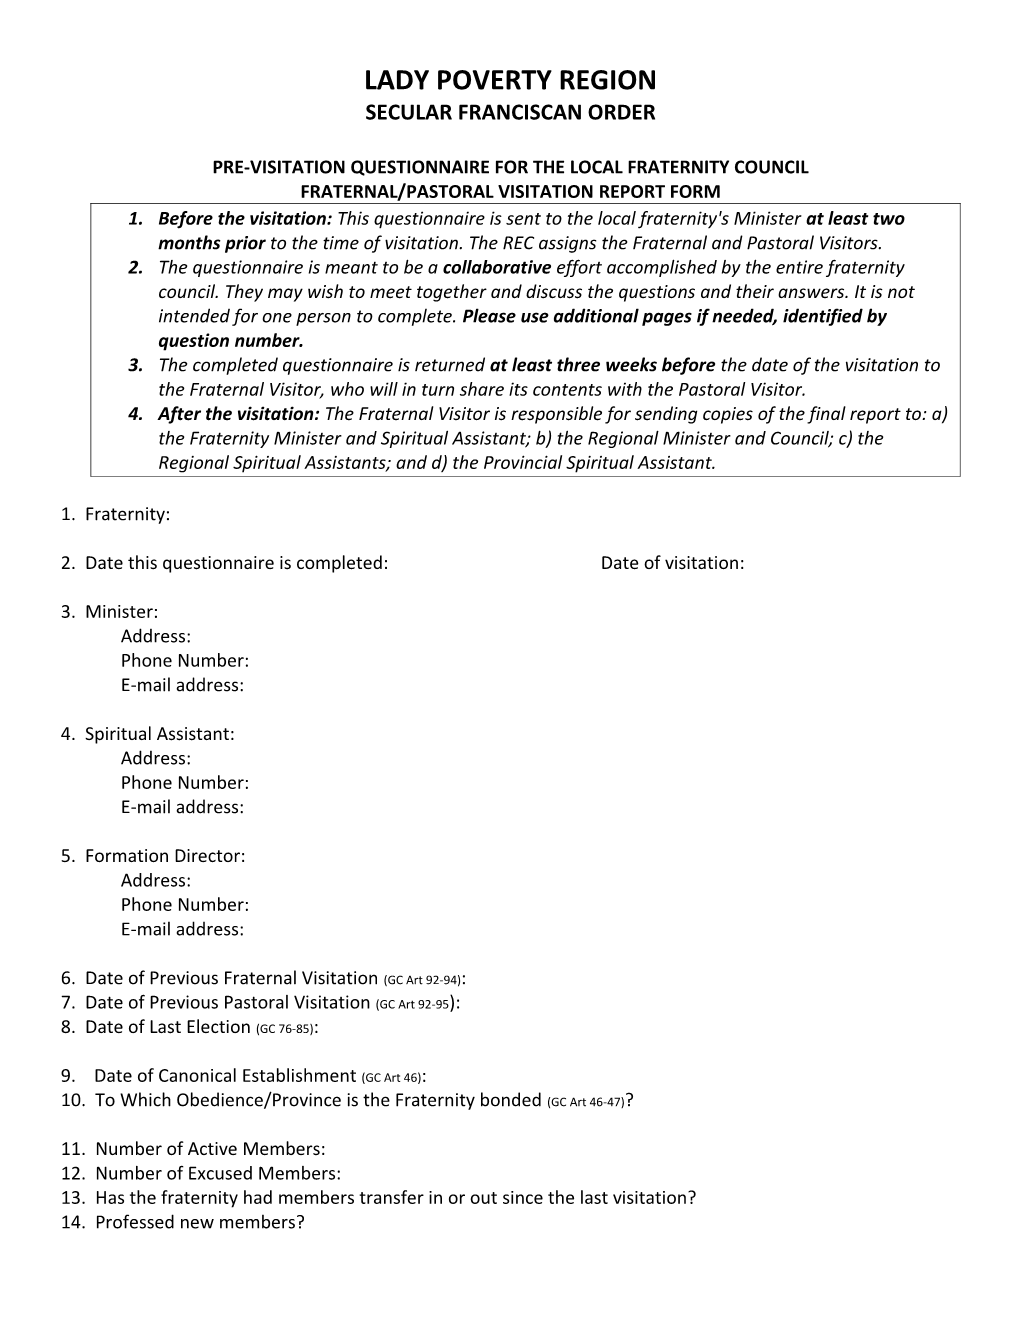 Pre-Visitation Questionnaire for the Local Fraternity Council